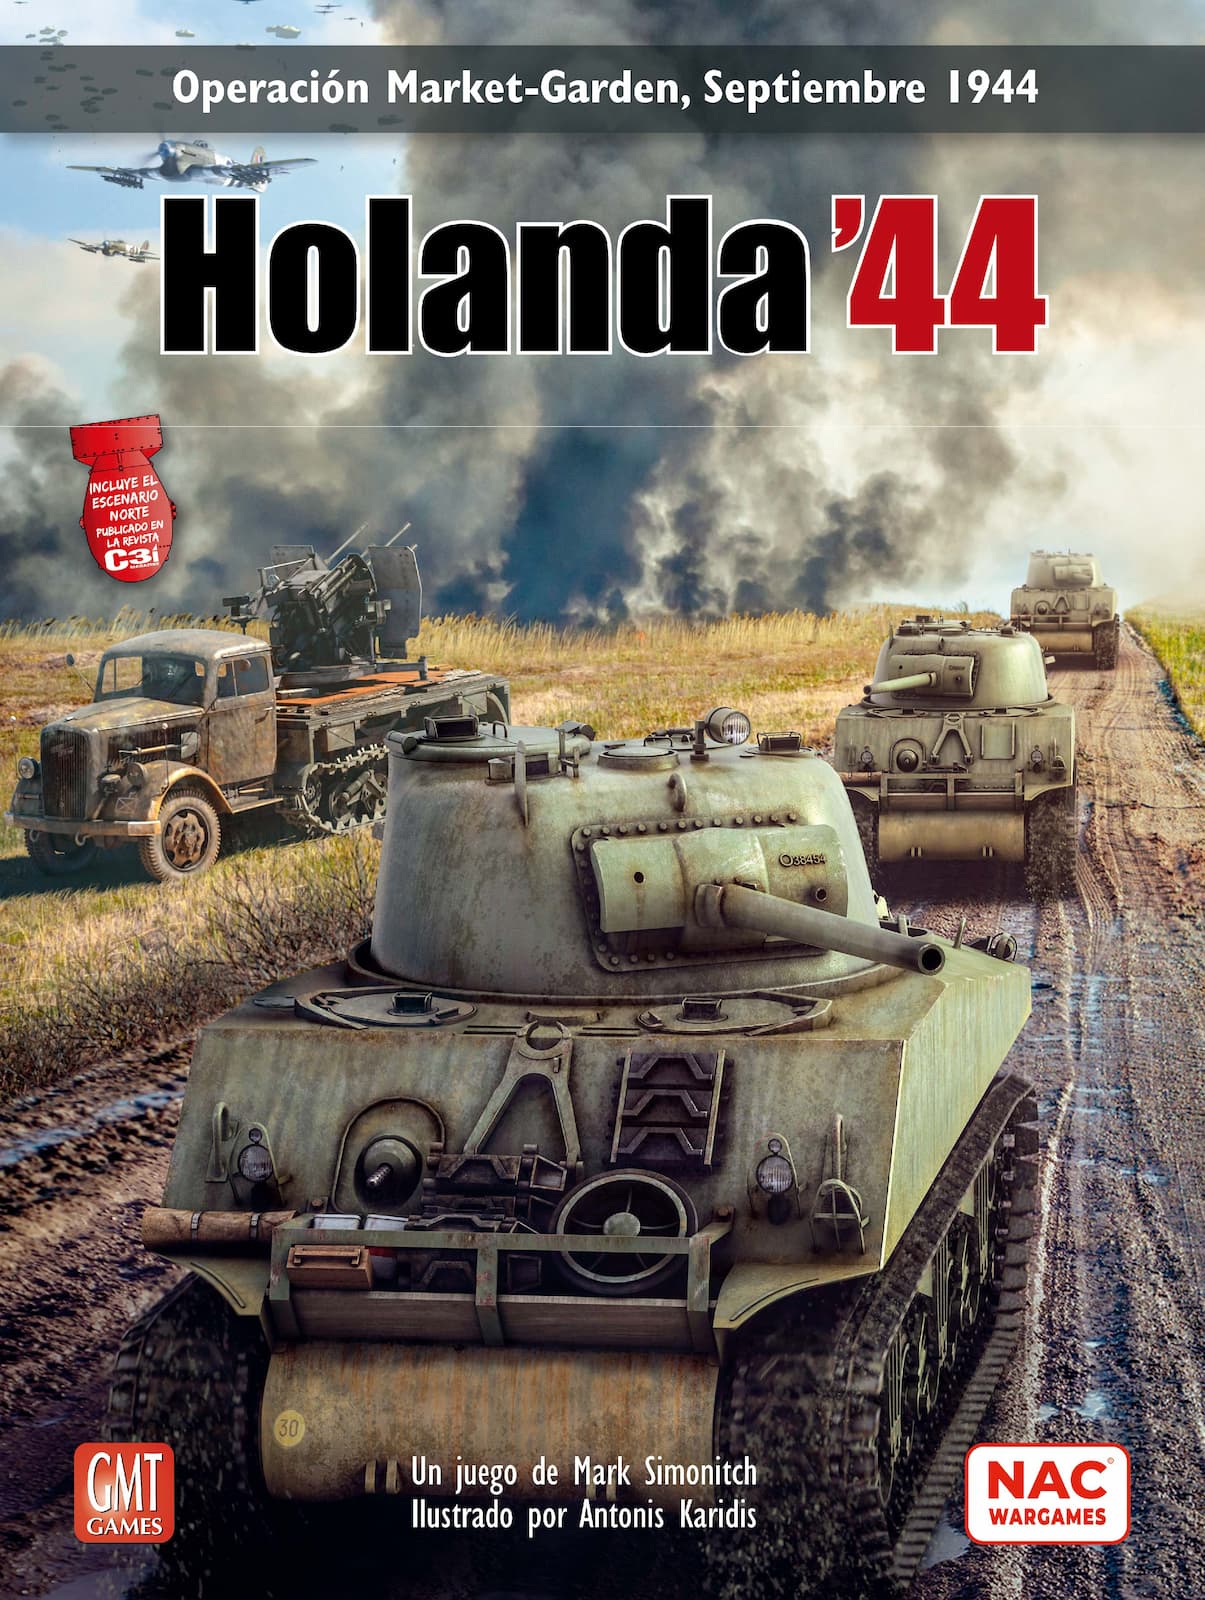 Holland 44 the board game was manufactured by Boda Games Manufacturing.